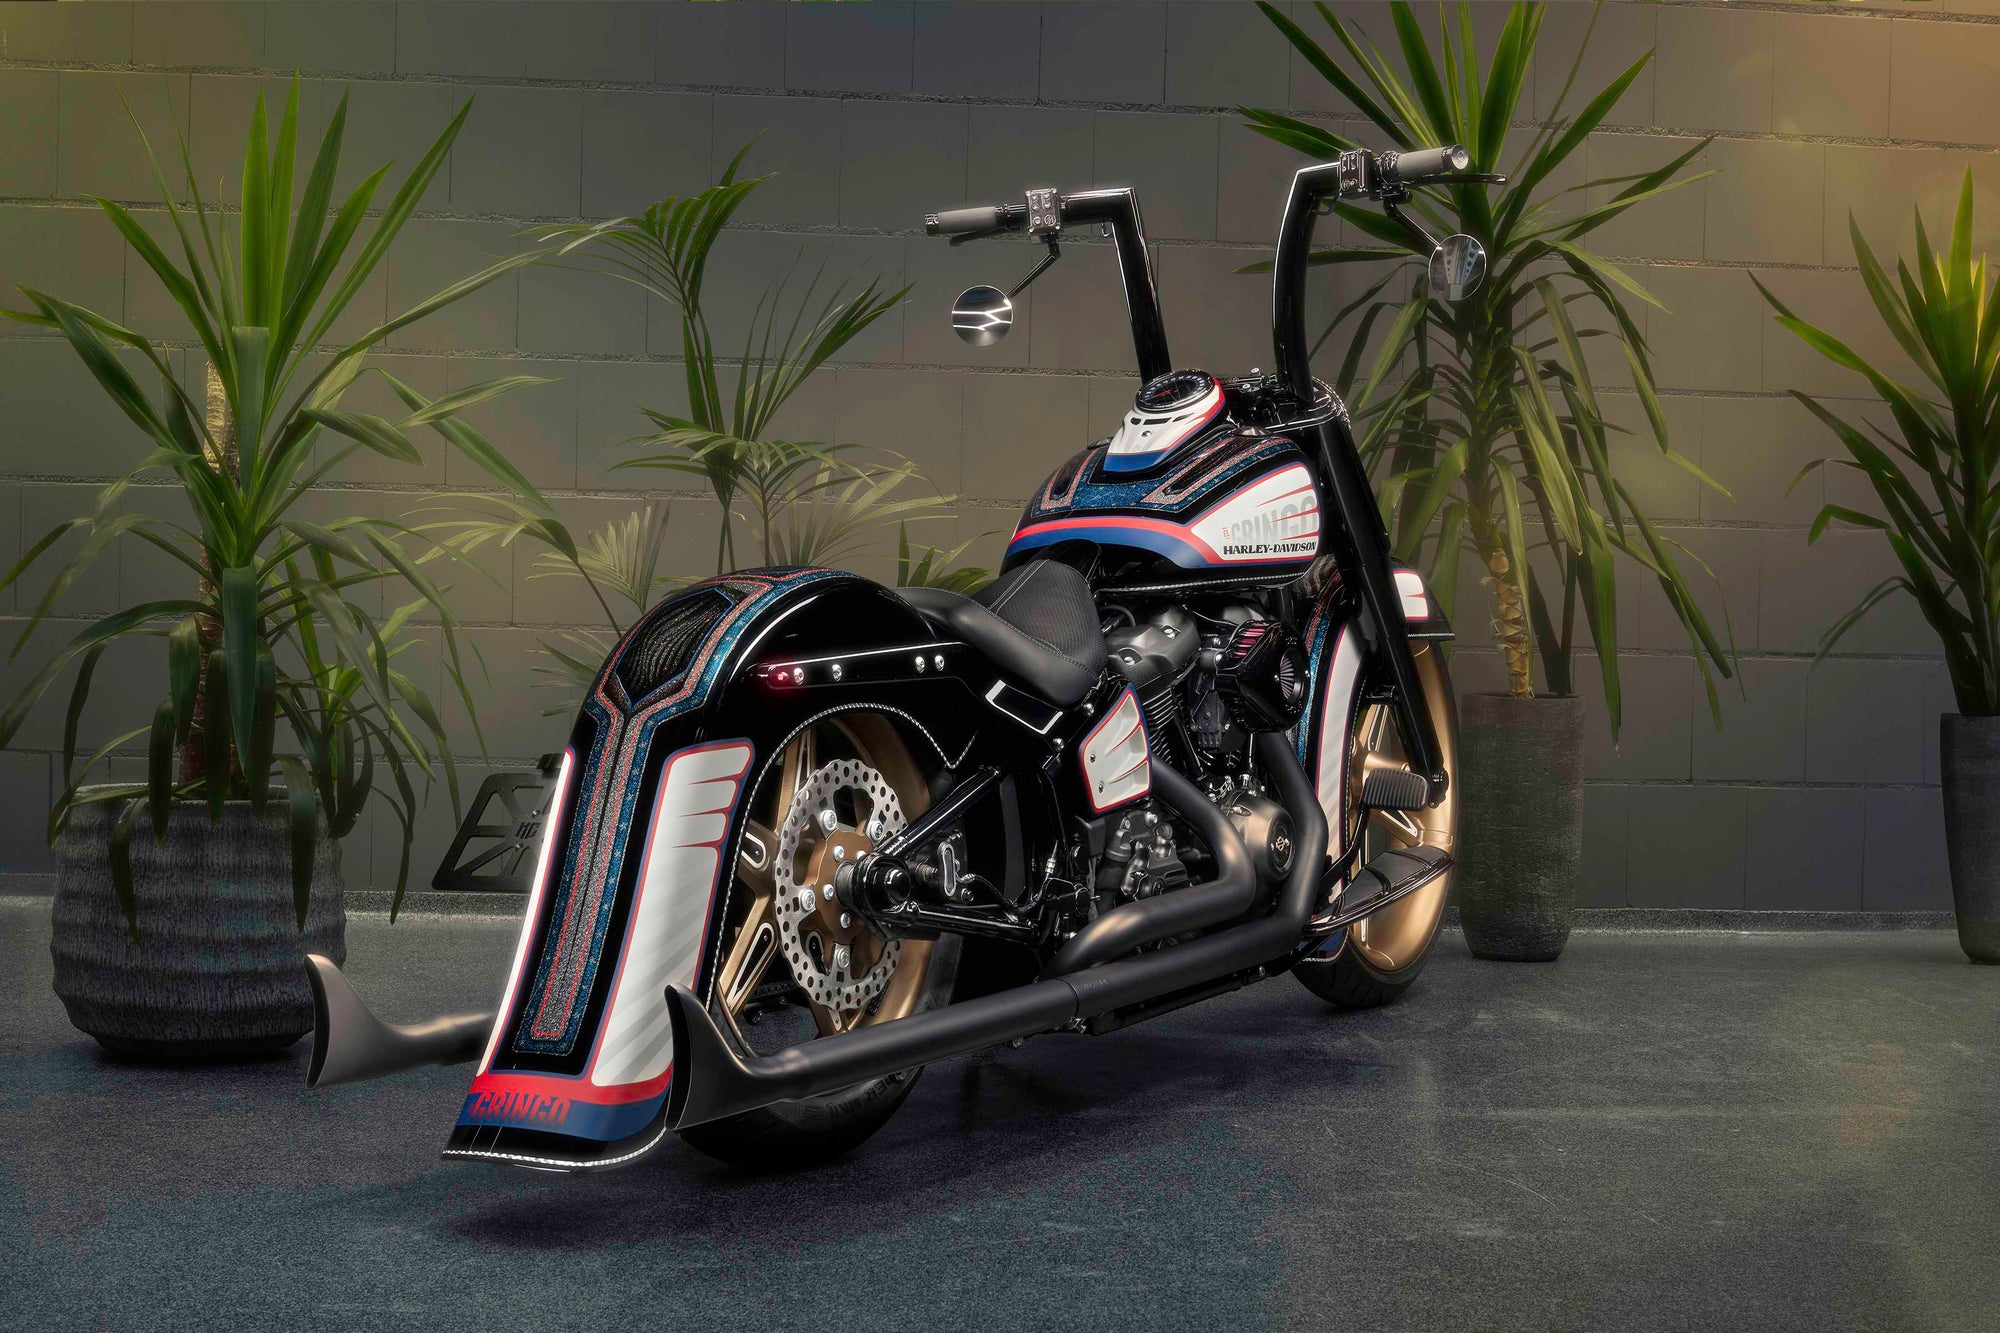 Modified Harley Davidson motorcycle with Killer Custom parts from the rear with some house plants in the background